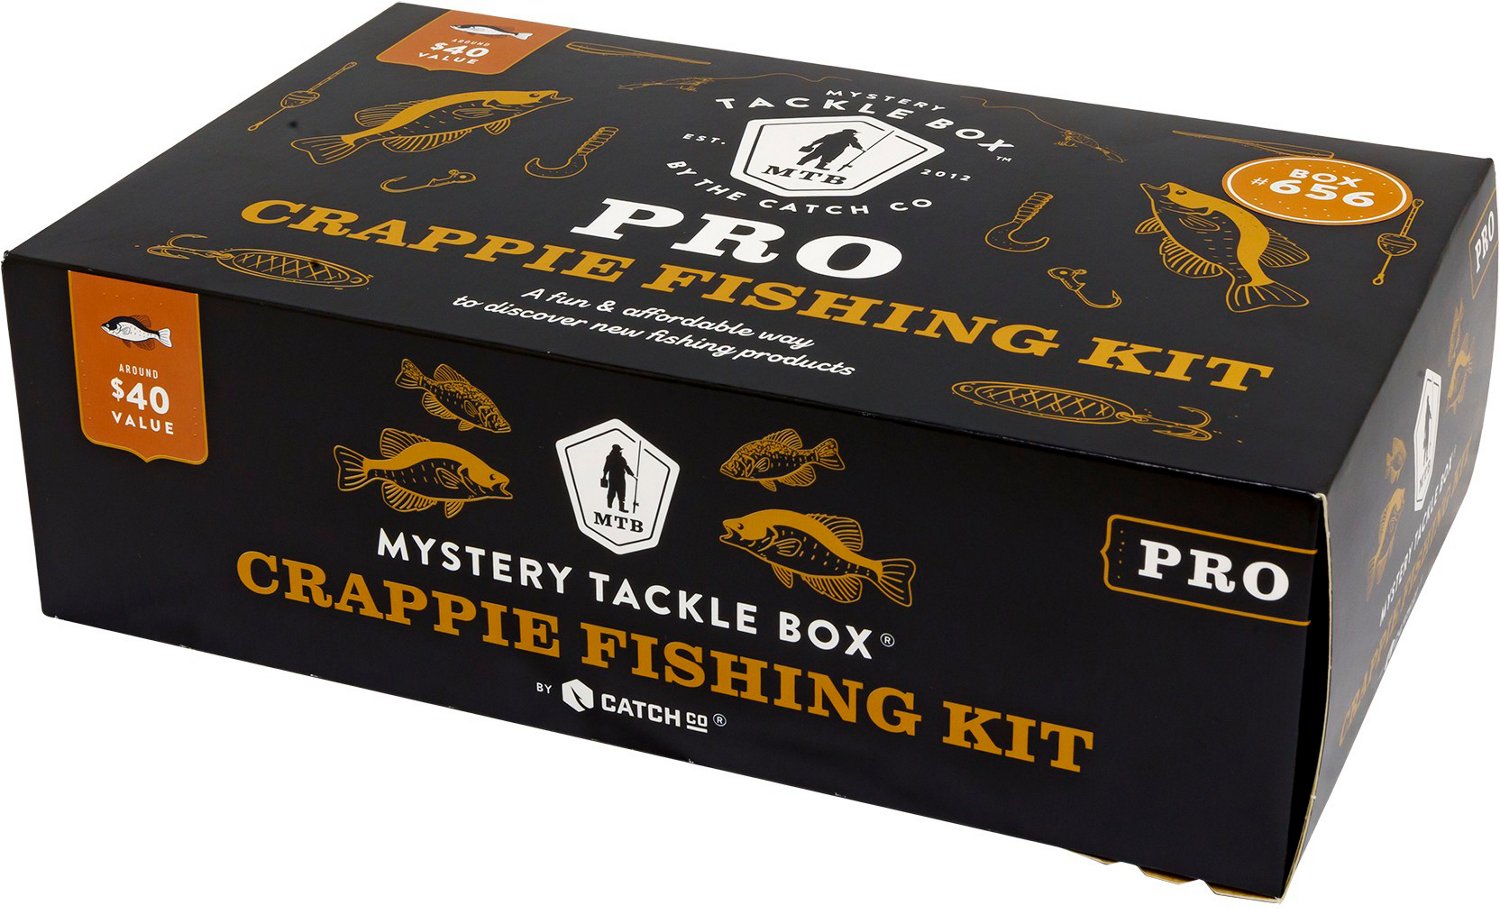 Mystery Tackle Box Crappie Pro Kit